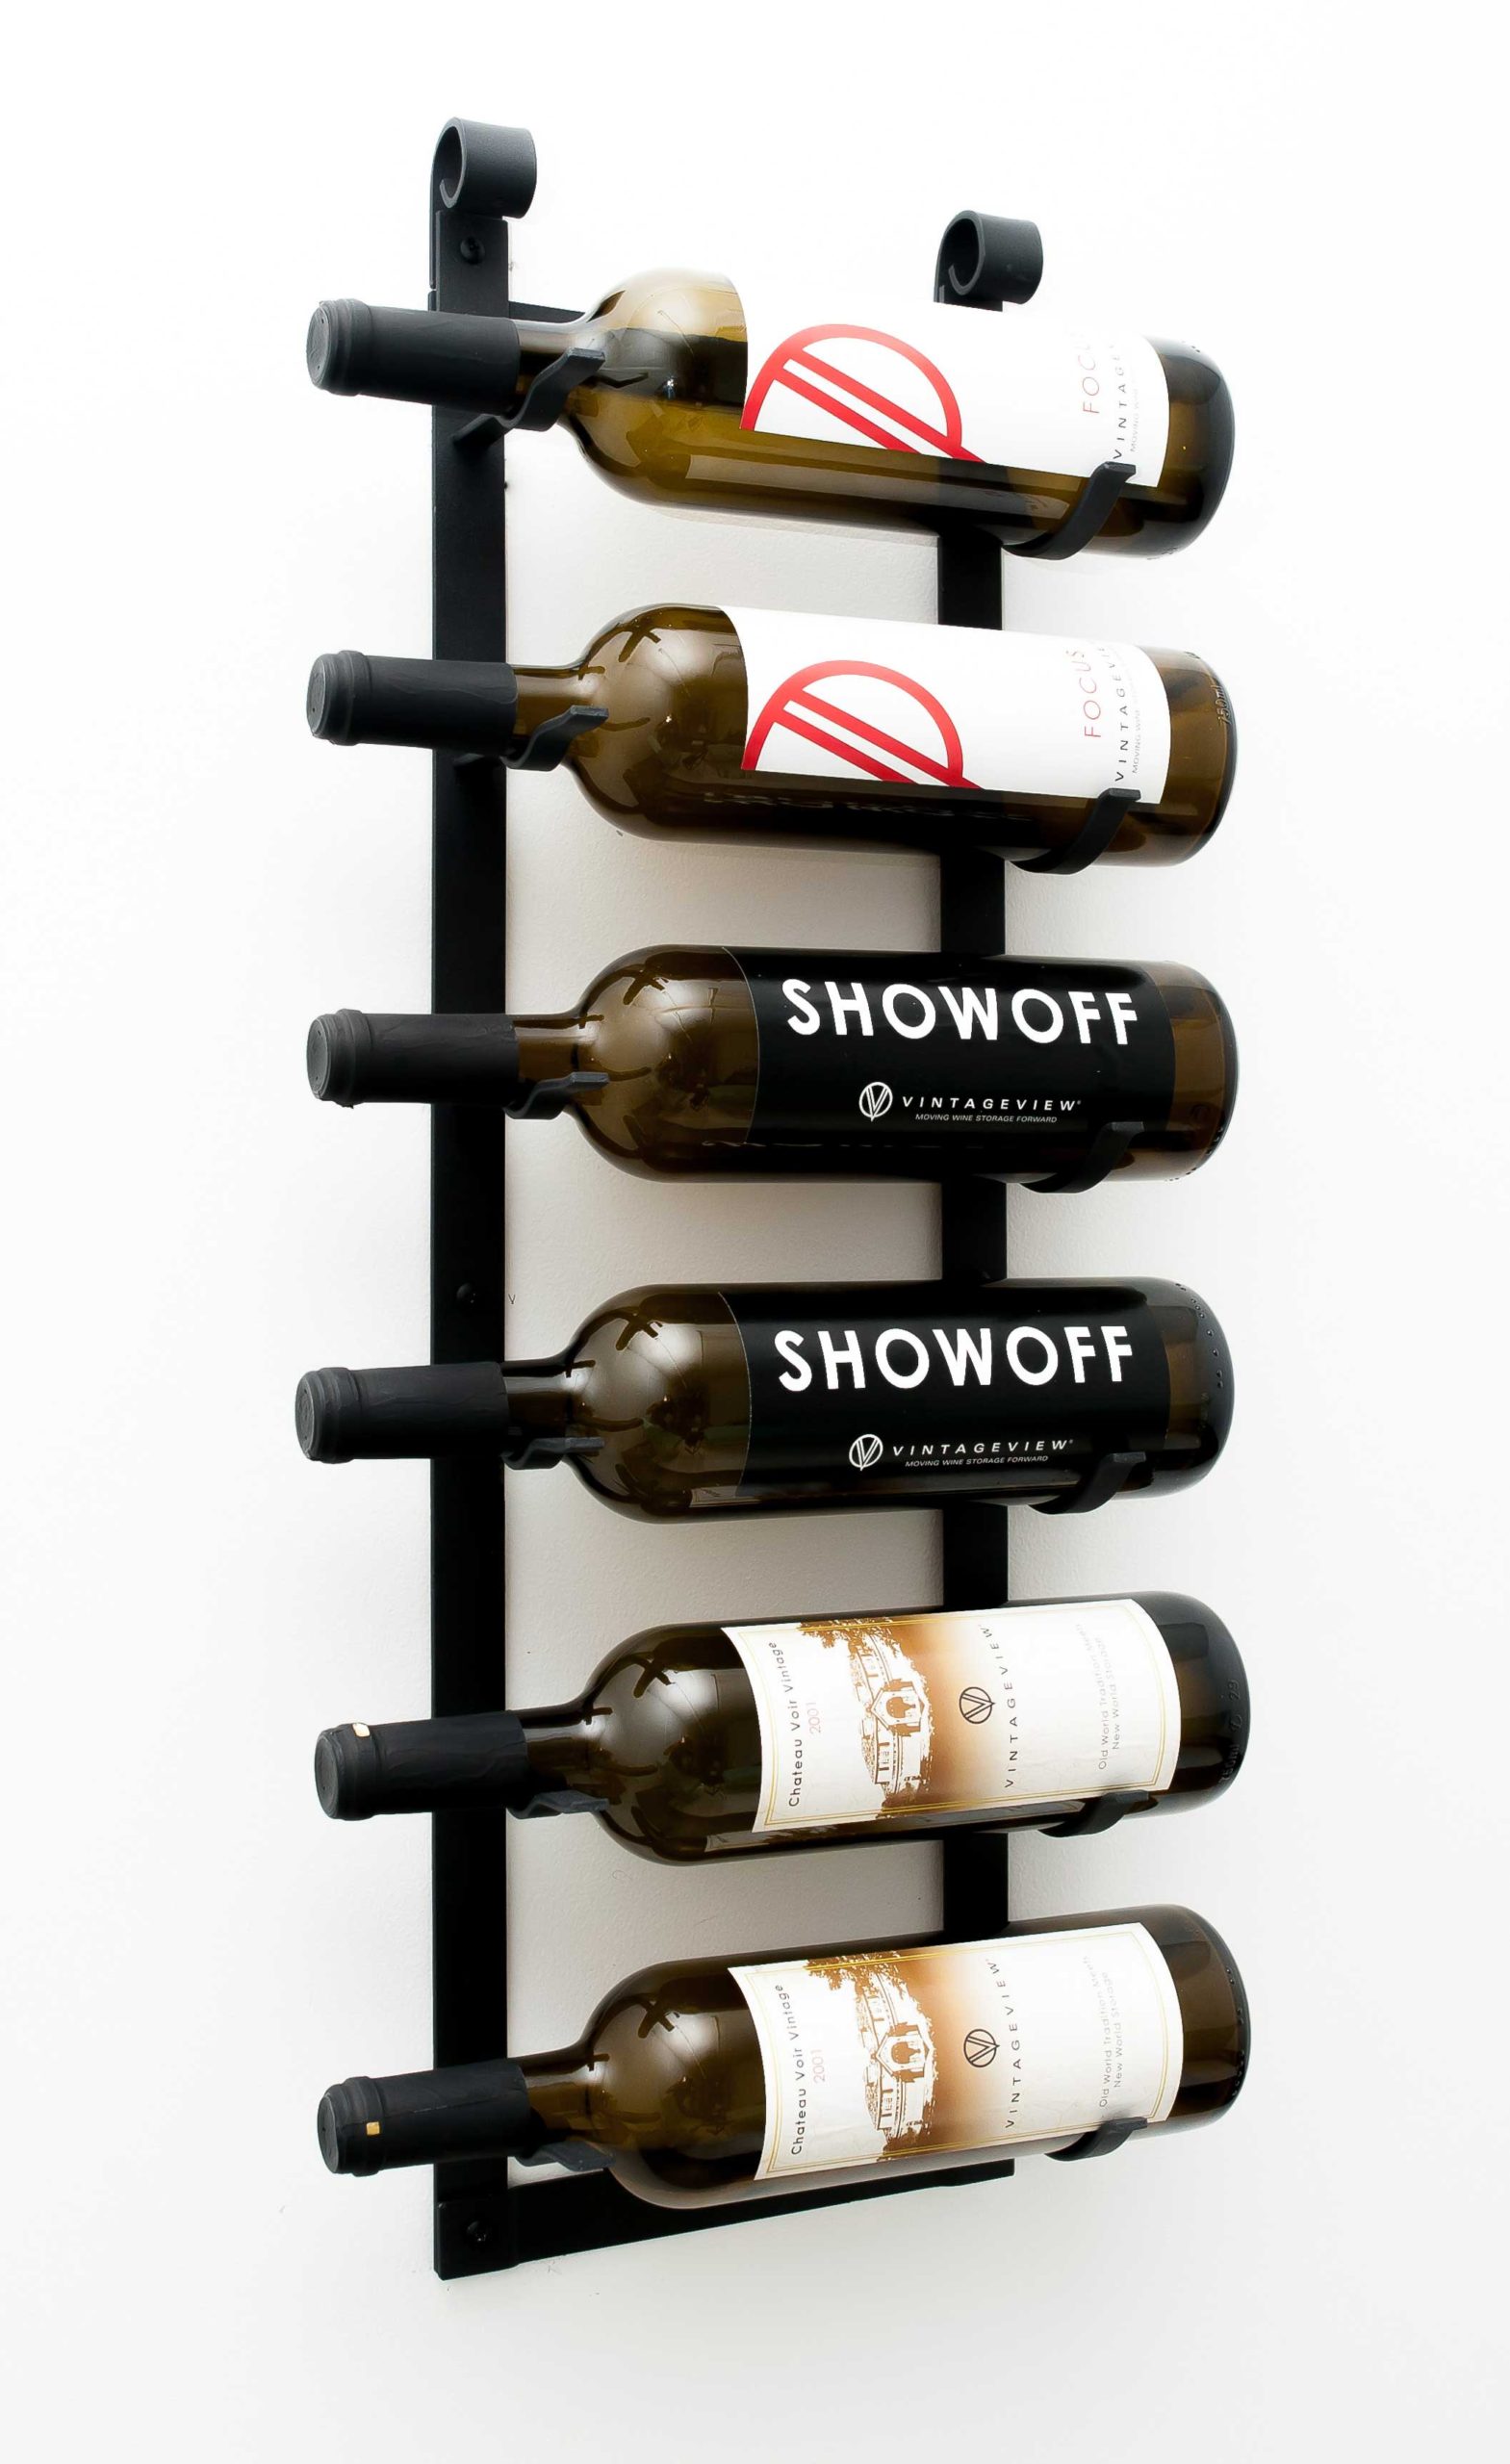 3 Bottle Wall Mounted Wine Bottle Back Stylish Modern Wine Storage with Label Forward Design VintageView Wall Series Satin Black 